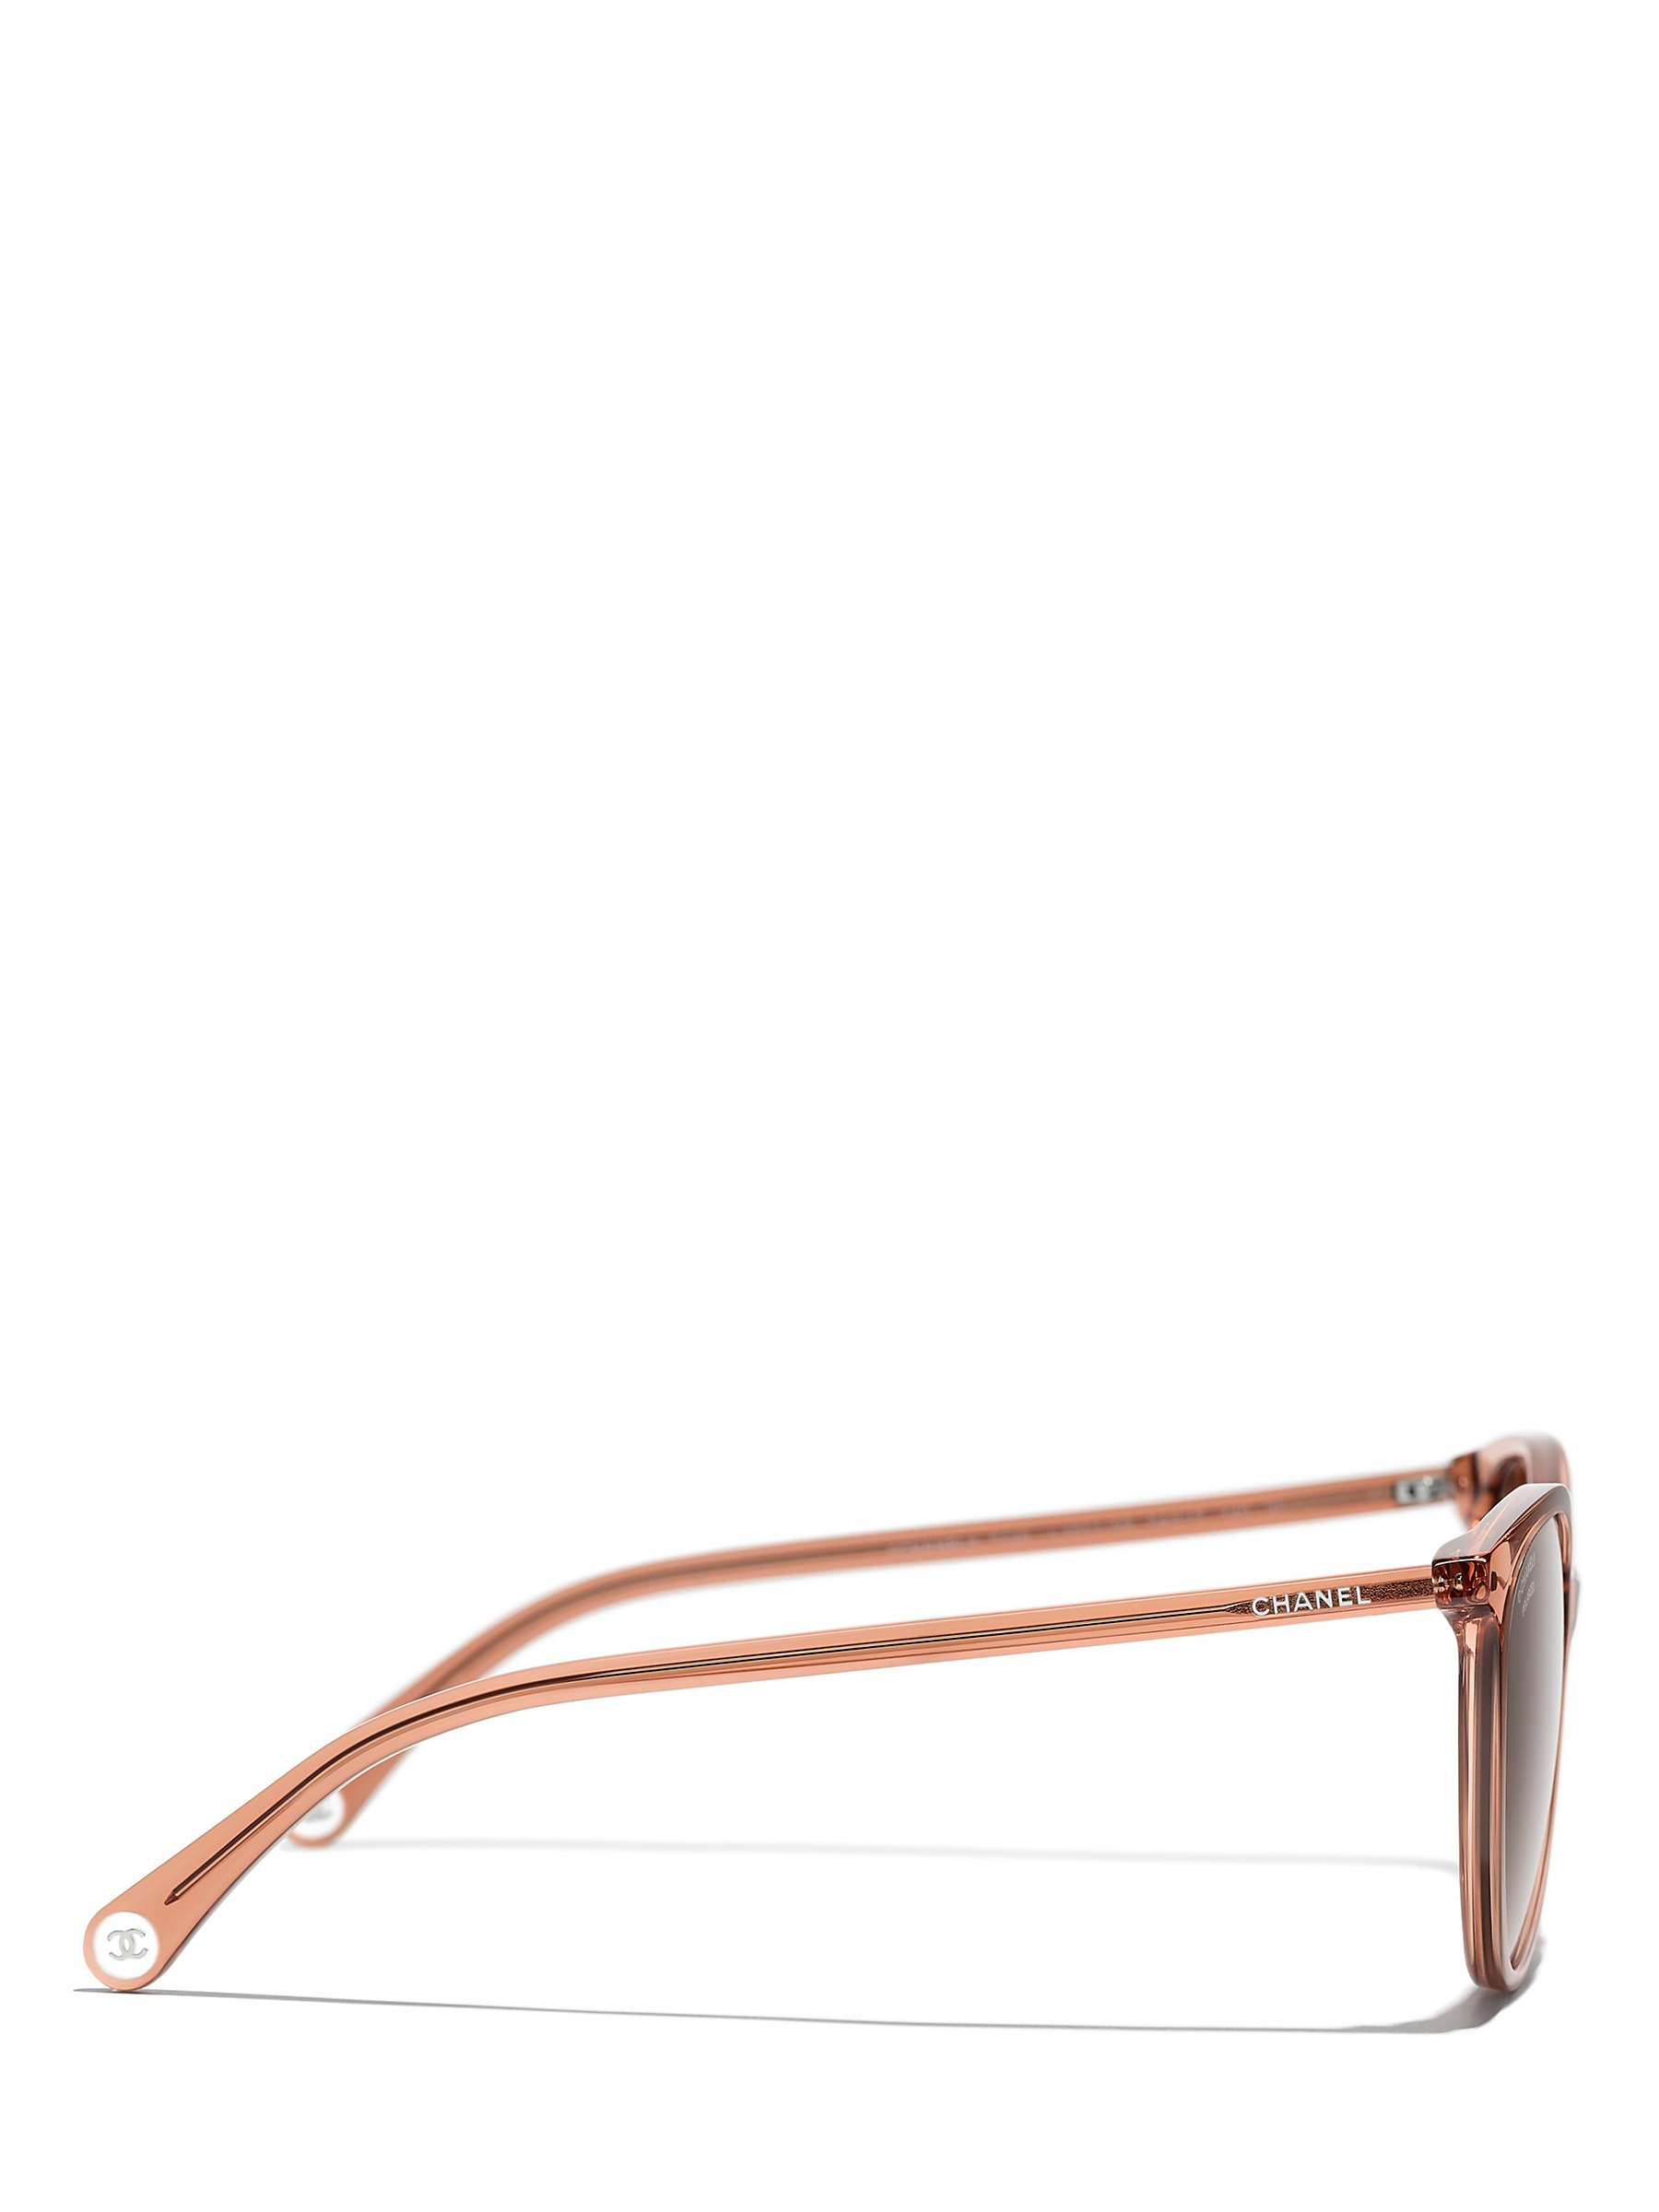 Buy CHANEL Oval Sunglasses CH5448 Pink/Brown Gradient Online at johnlewis.com